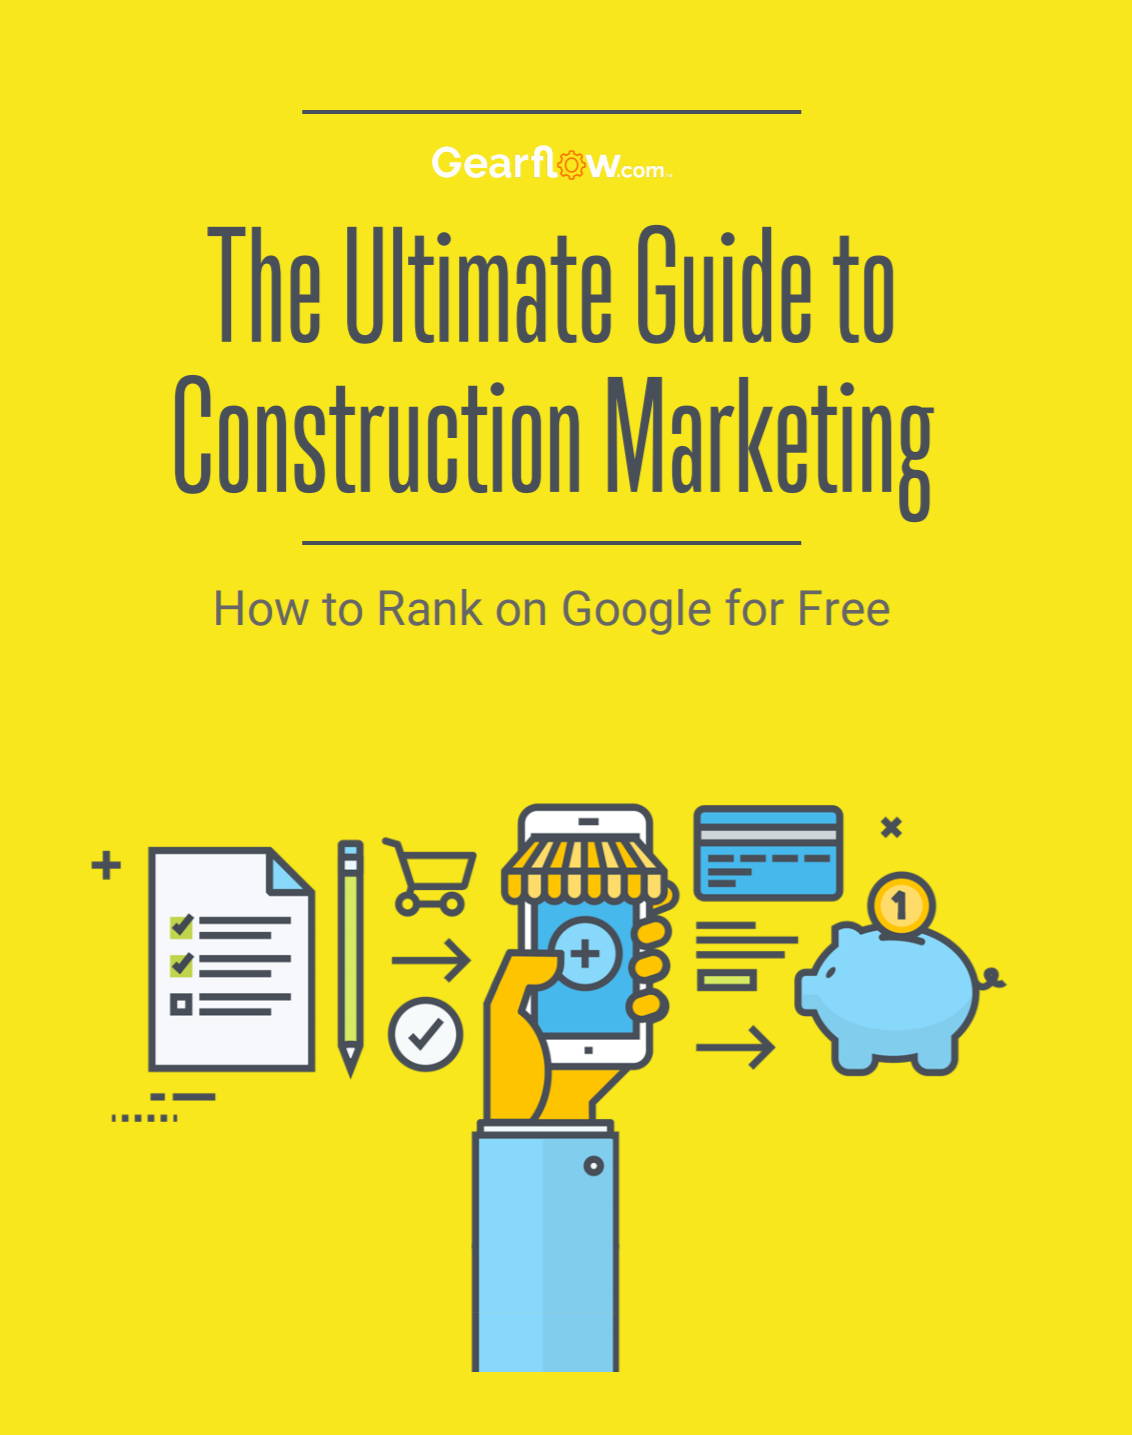 Learn how to attract new customers online and outrank your competition on Google with this free download.